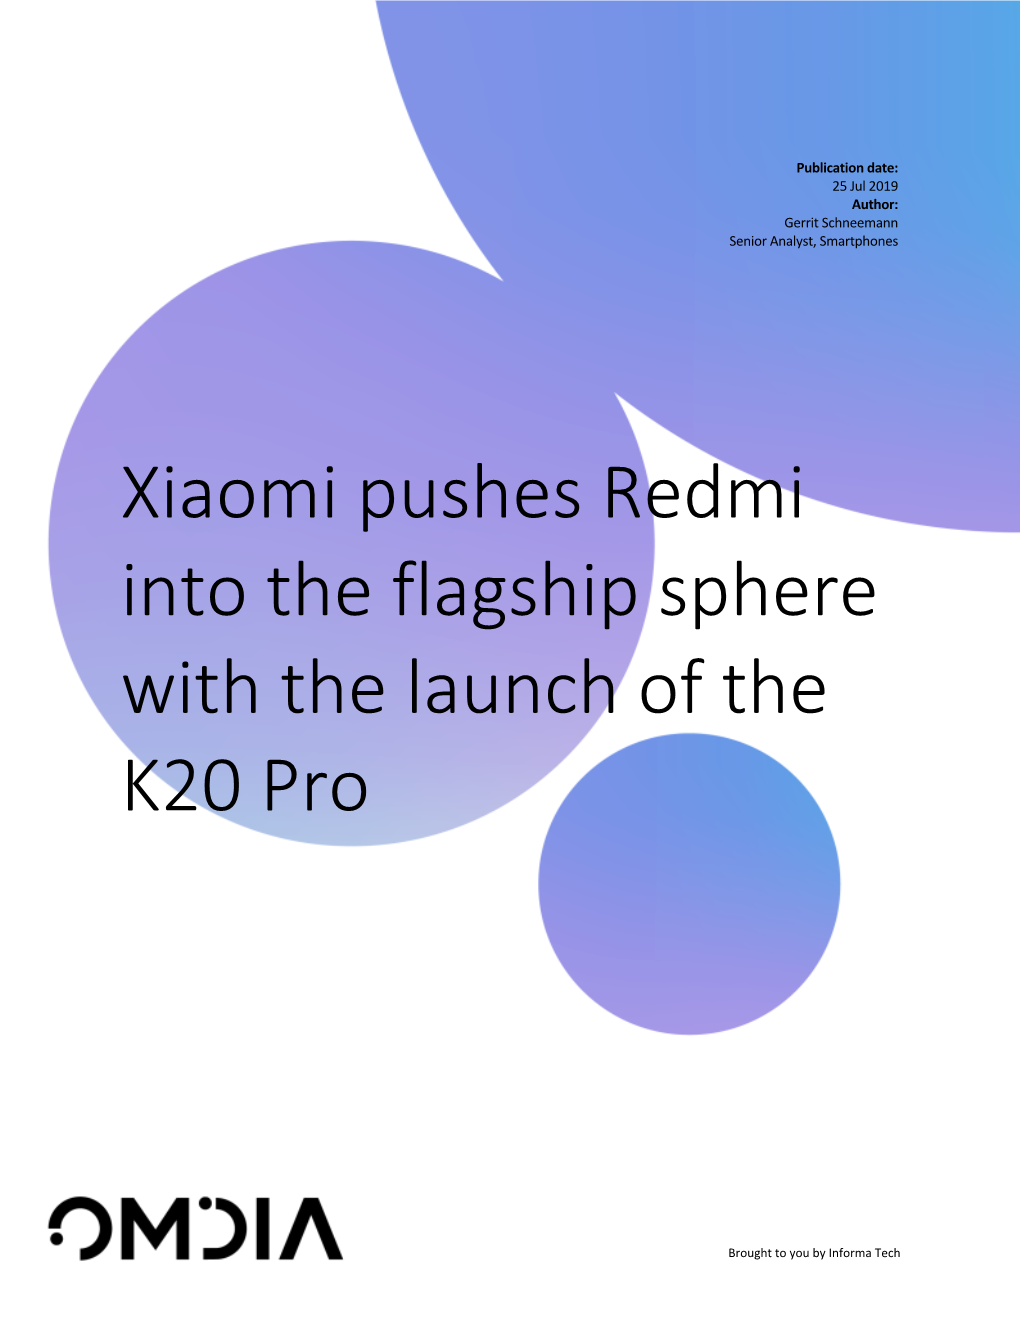 Xiaomi Pushes Redmi Into the Flagship Sphere with the Launch of the K20 Pro